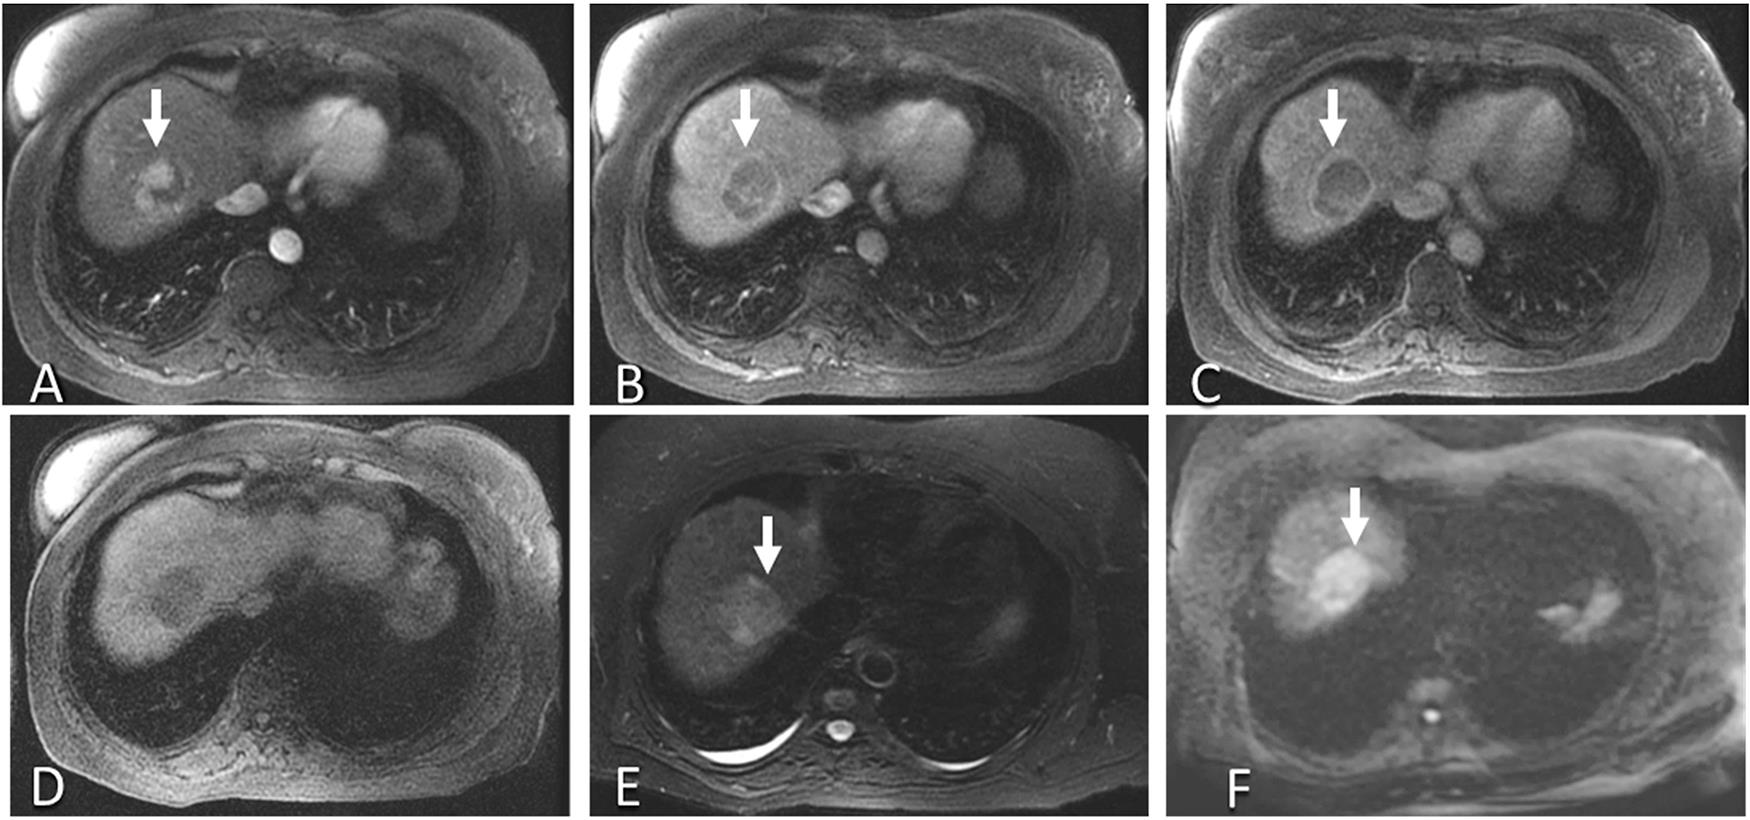 Axial magnetic resonance imaging of the HCC in a 57-year-old patient with cirrhosis secondary to chronic hepatitis C infection.